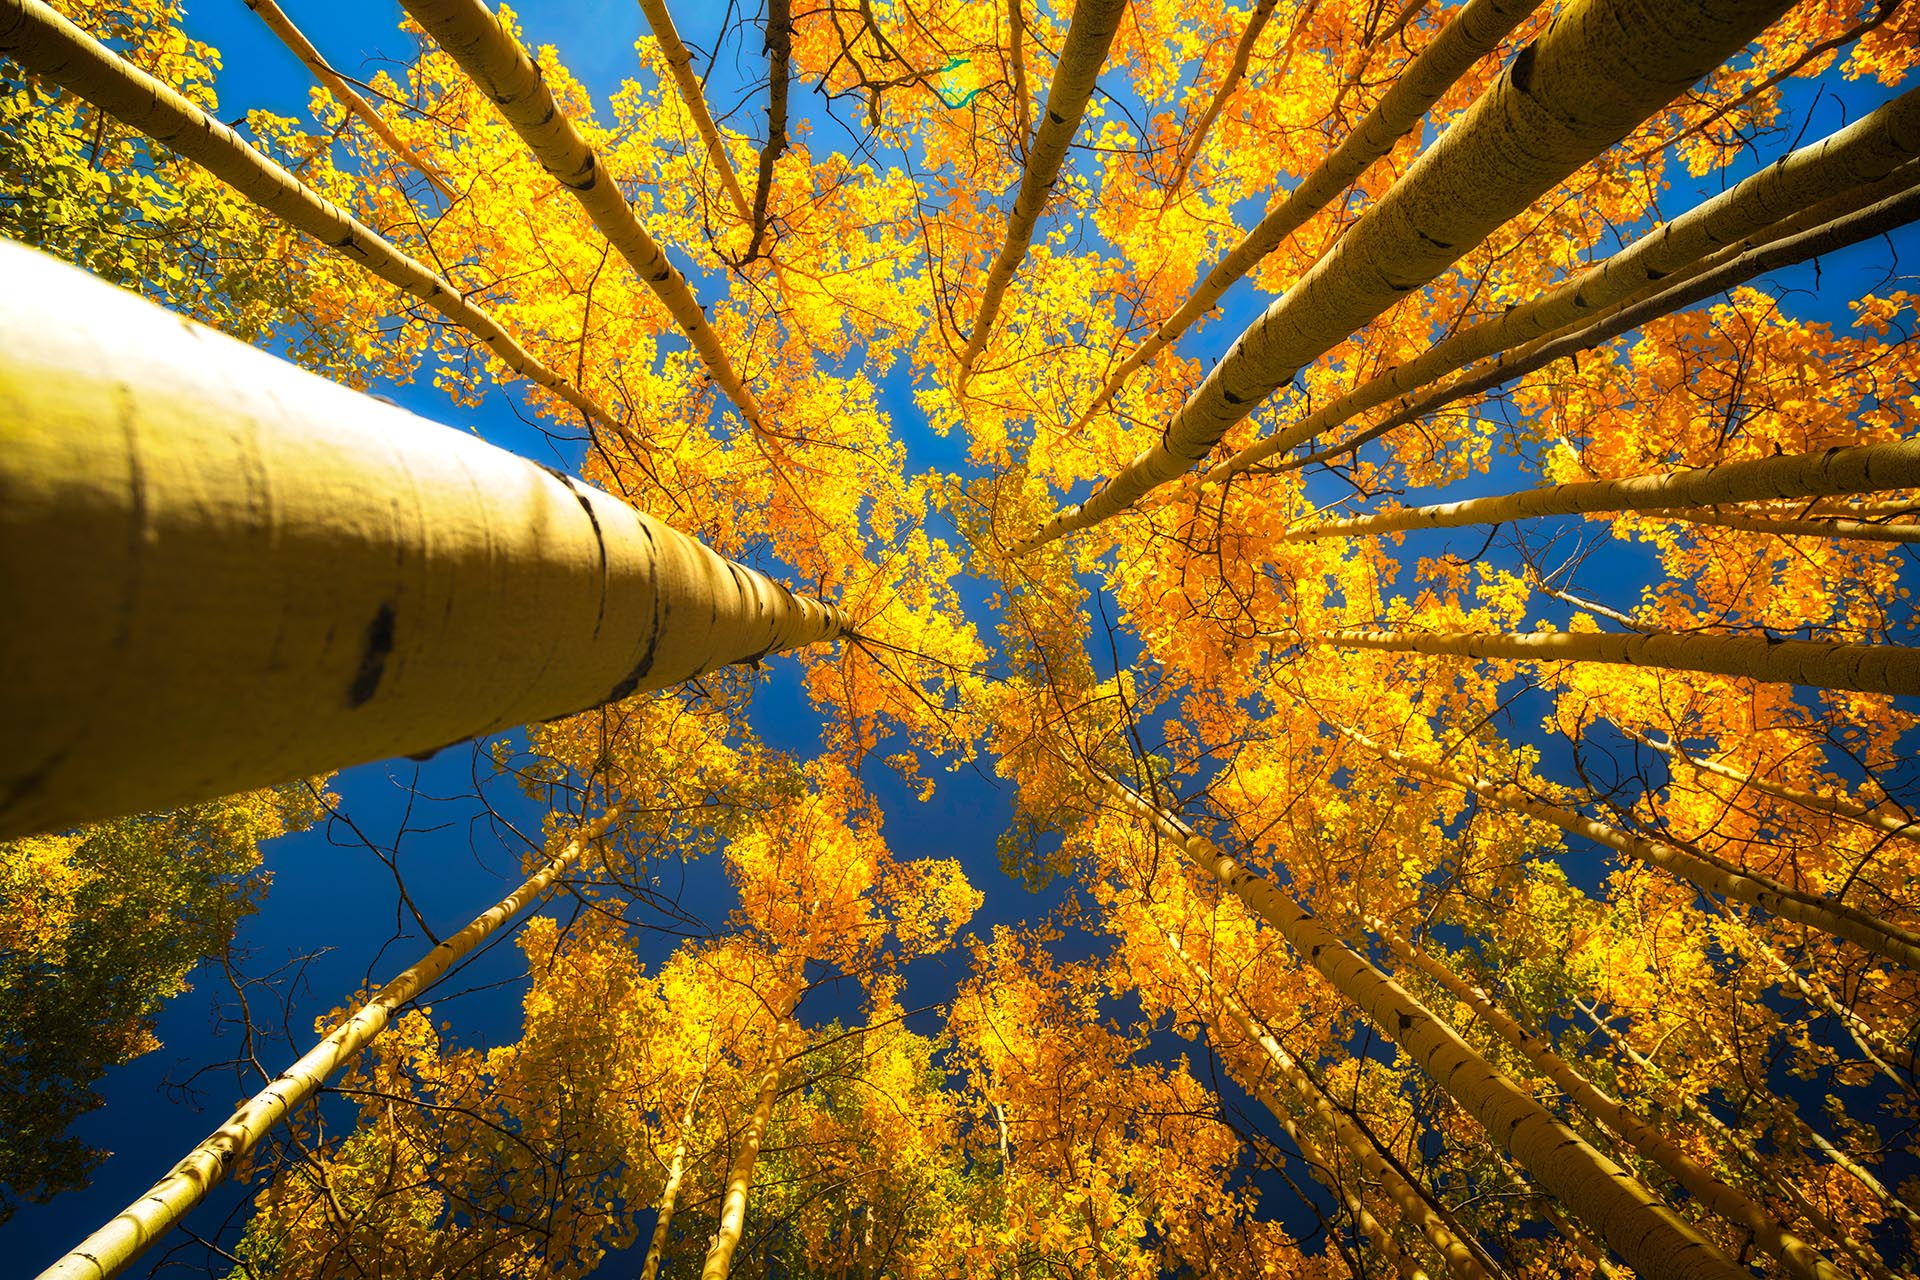 Upper view of the Aspen trees in the fall season with clear blue skies showing through